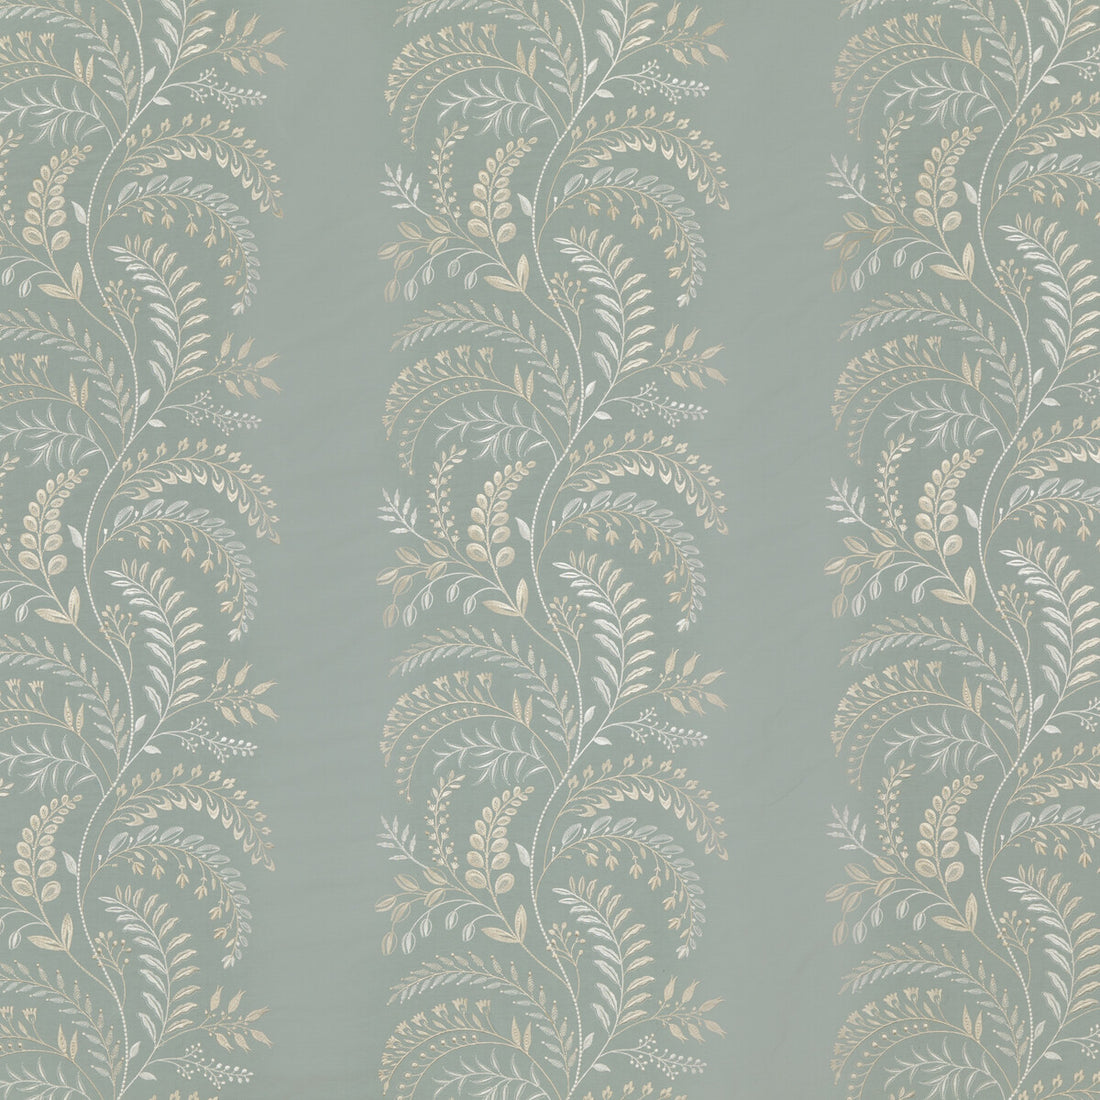 Pennington fabric in soft teal color - pattern BF10779.2.0 - by G P &amp; J Baker in the Signature Prints collection